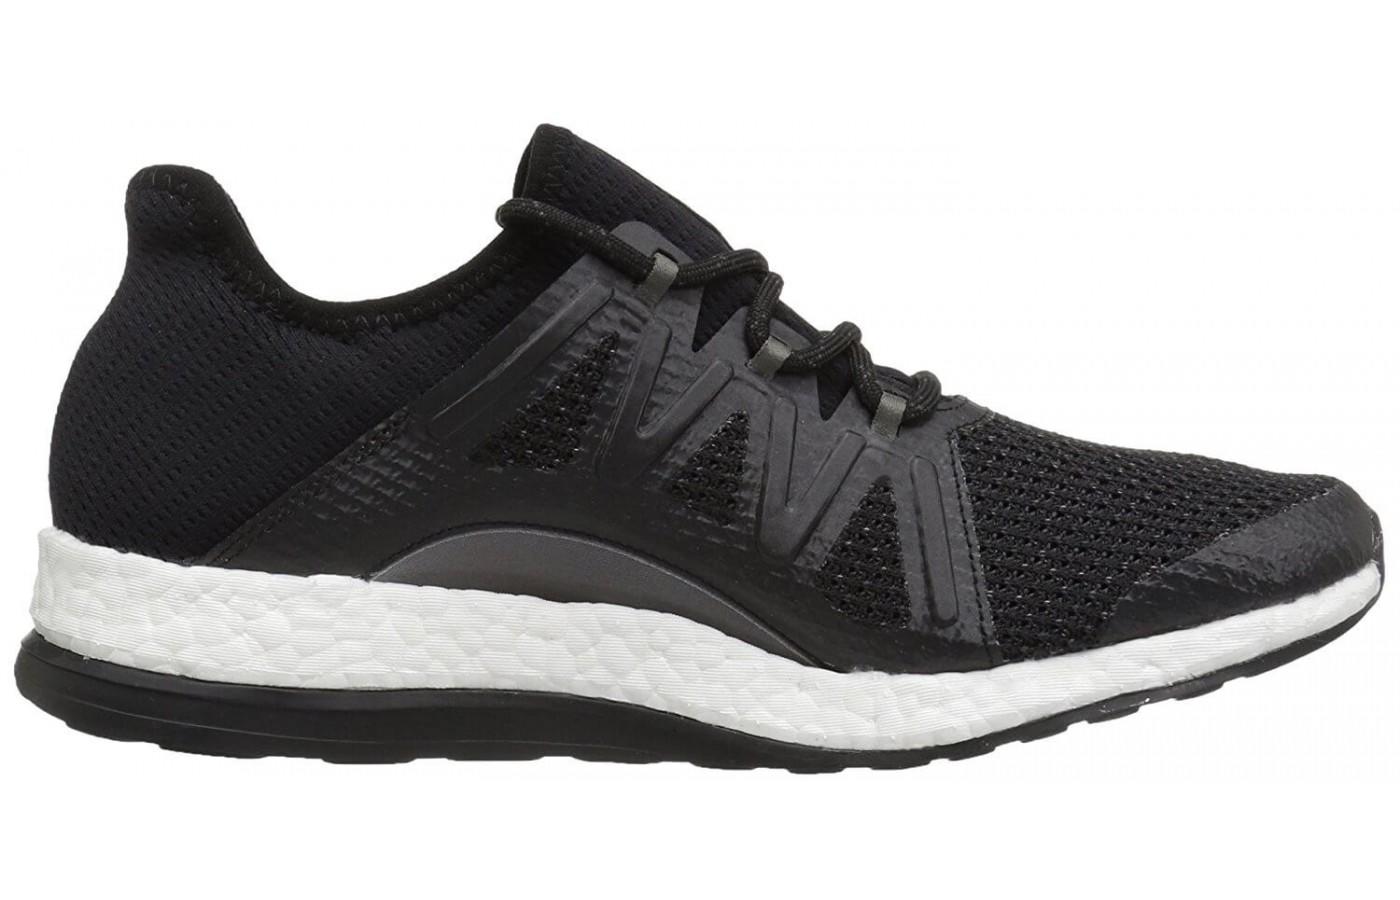 the stylish adidas pureBOOST Xpose is a sleek and smart-looking everyday trainer